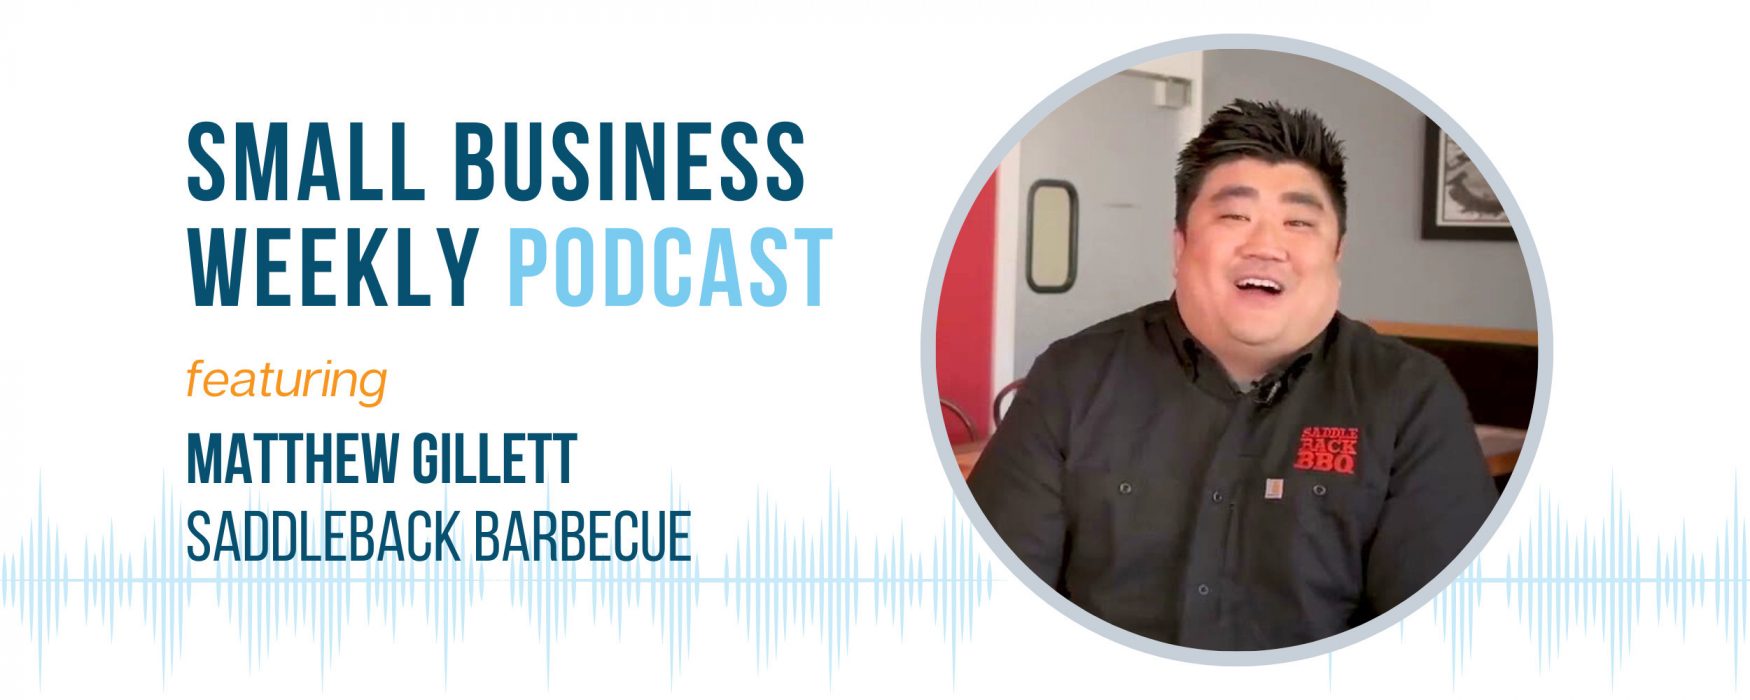 Small Business Weekly podcast with guest, Matthew Gillett of Saddleback Barbecue